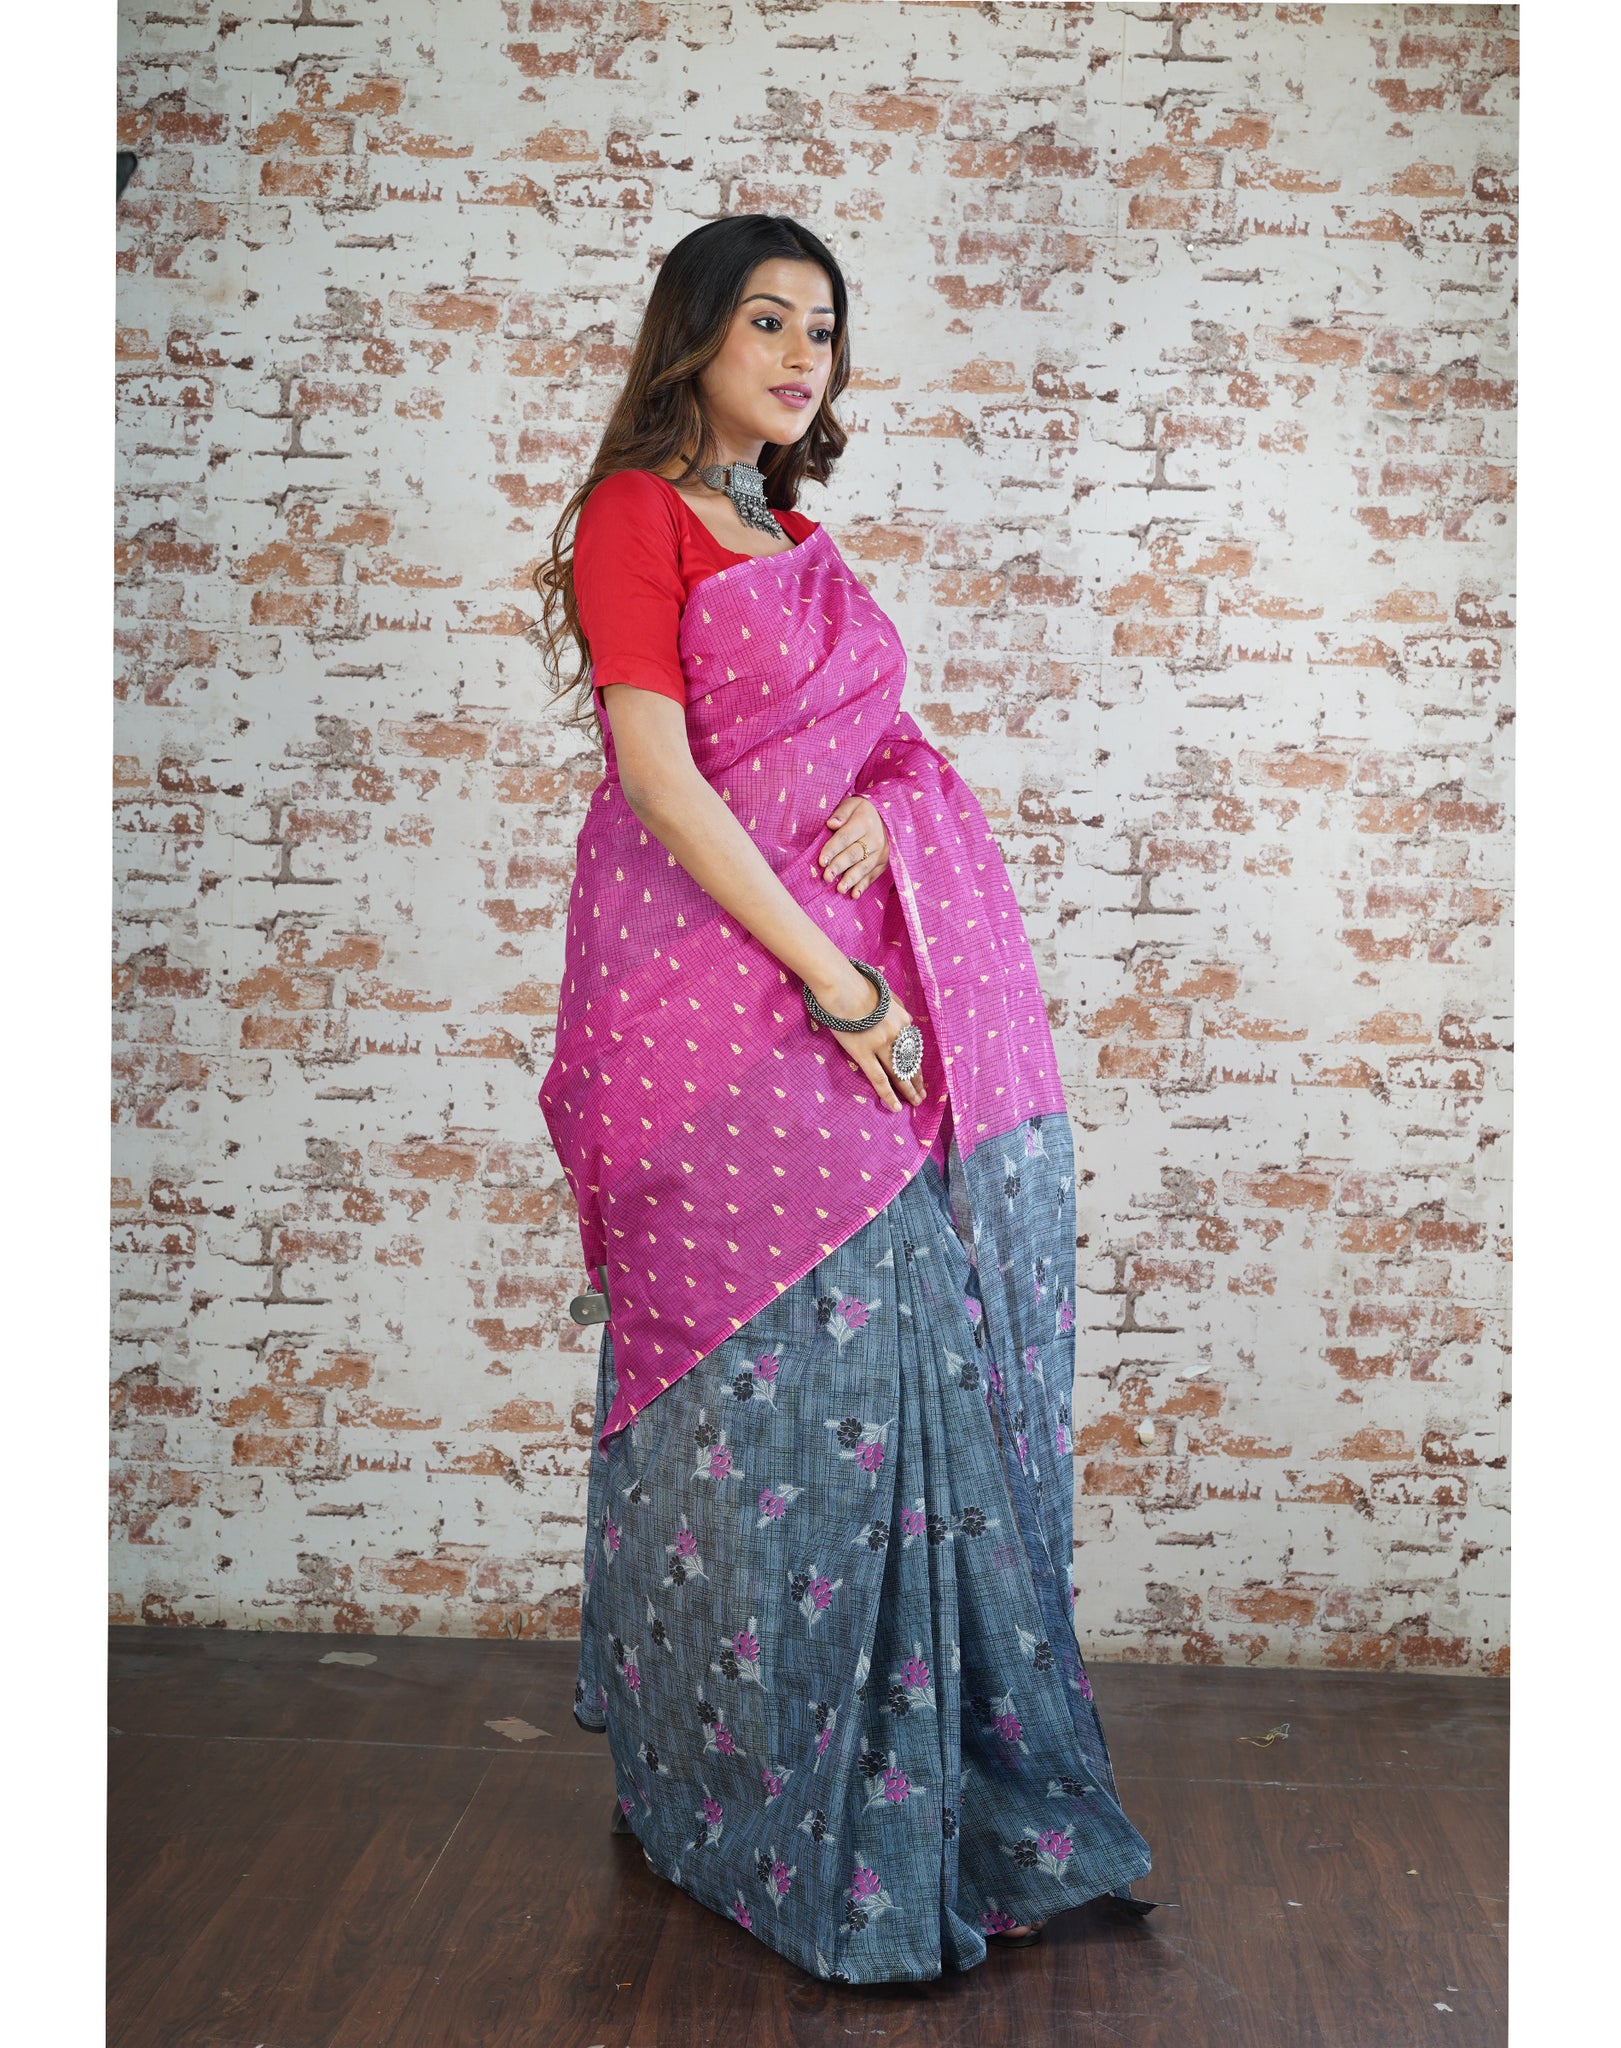 Pink and Blue Saree with Different Patterns on Both Colors